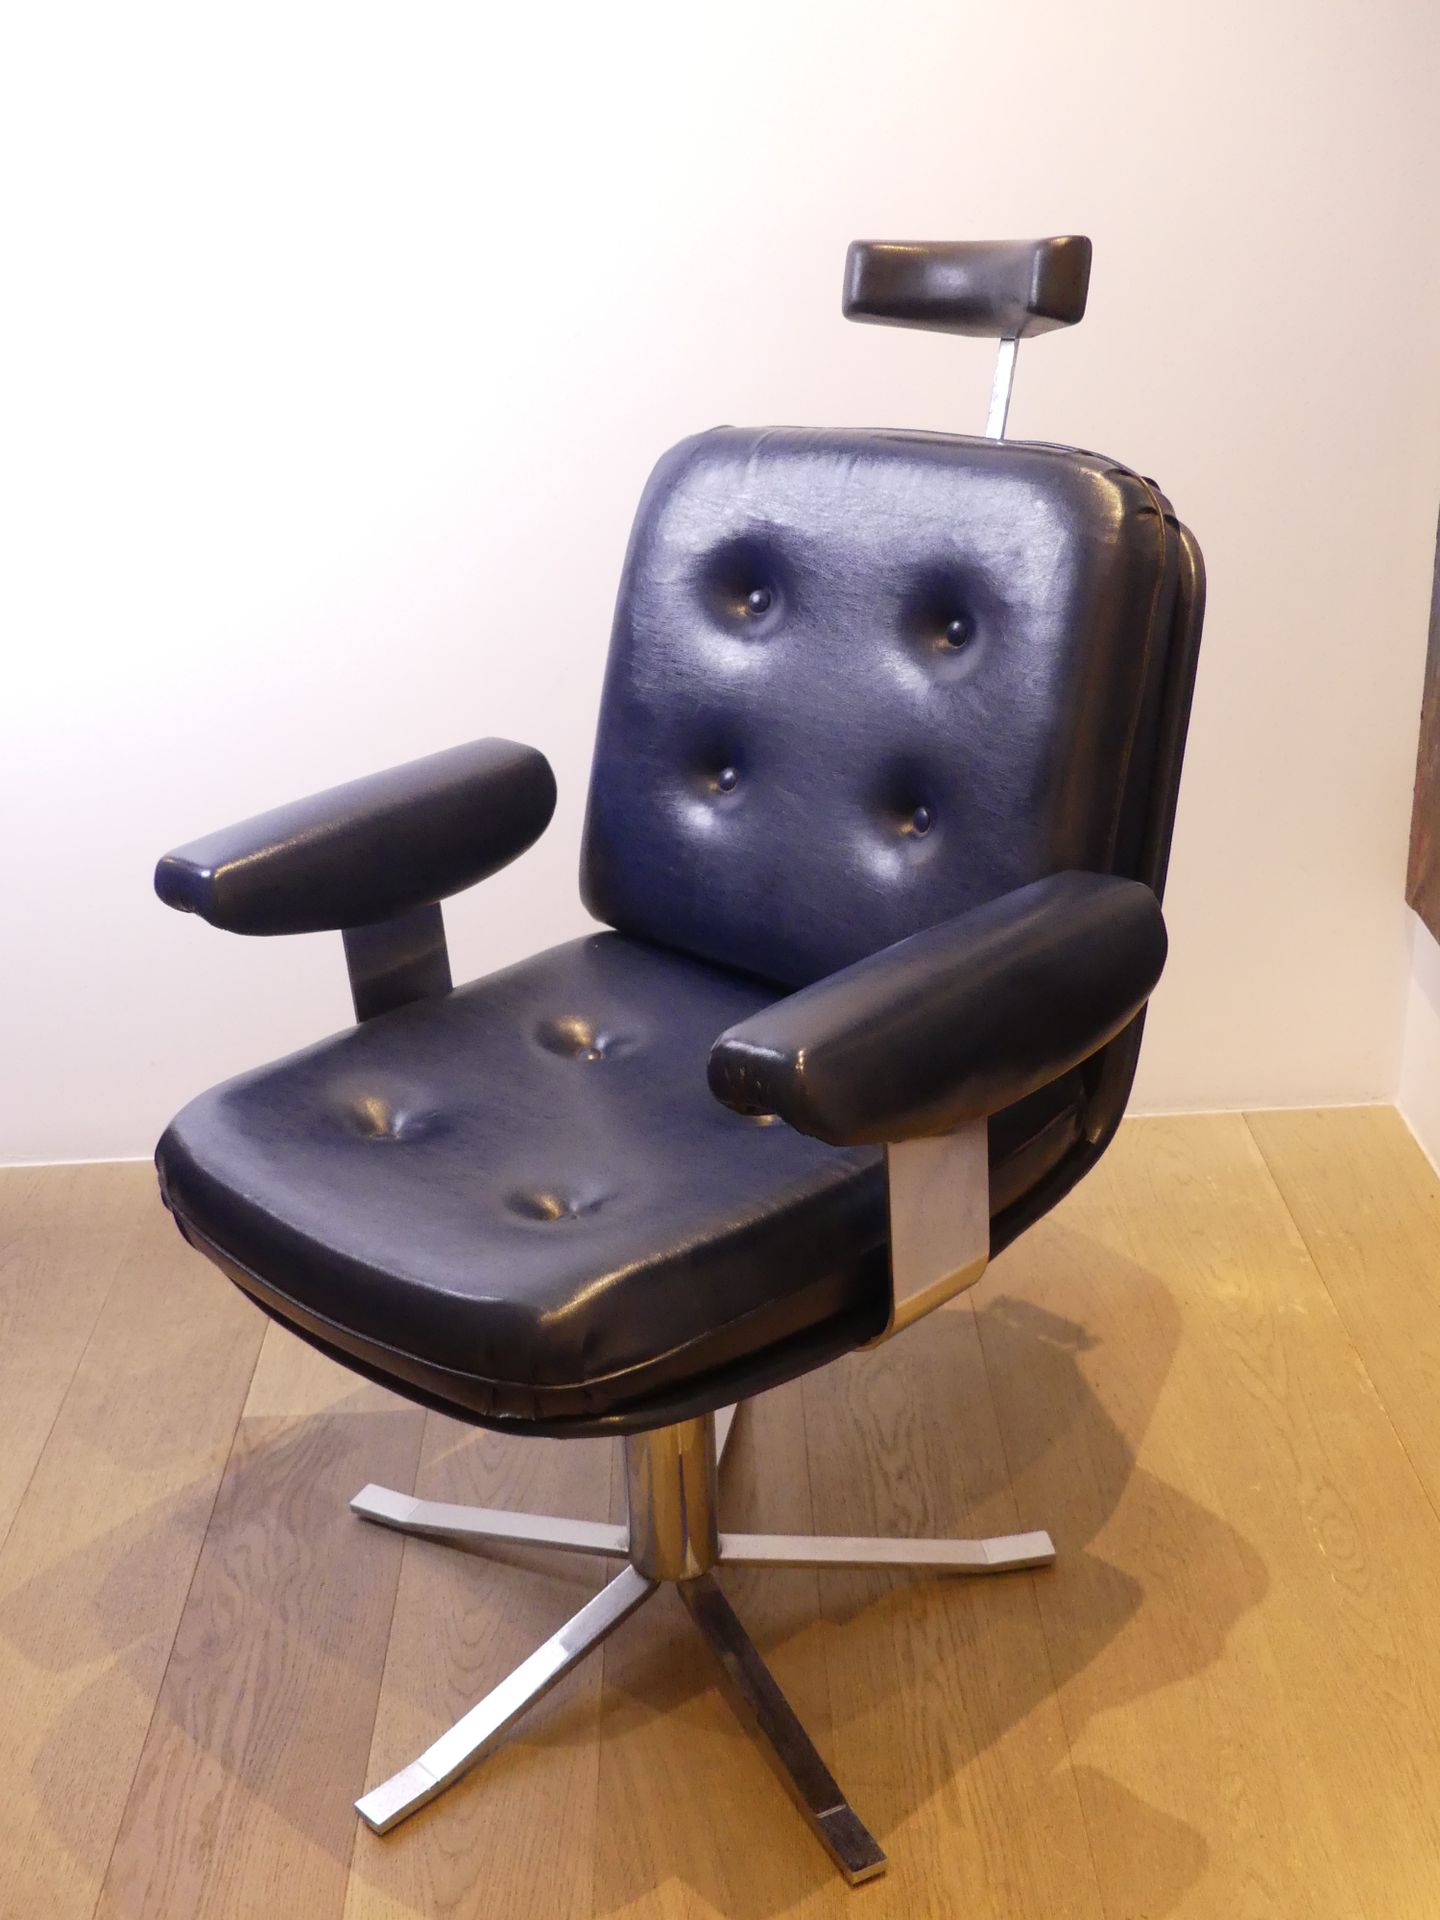 Null Barber chair in blue leatherette, chrome legs, removable headrest